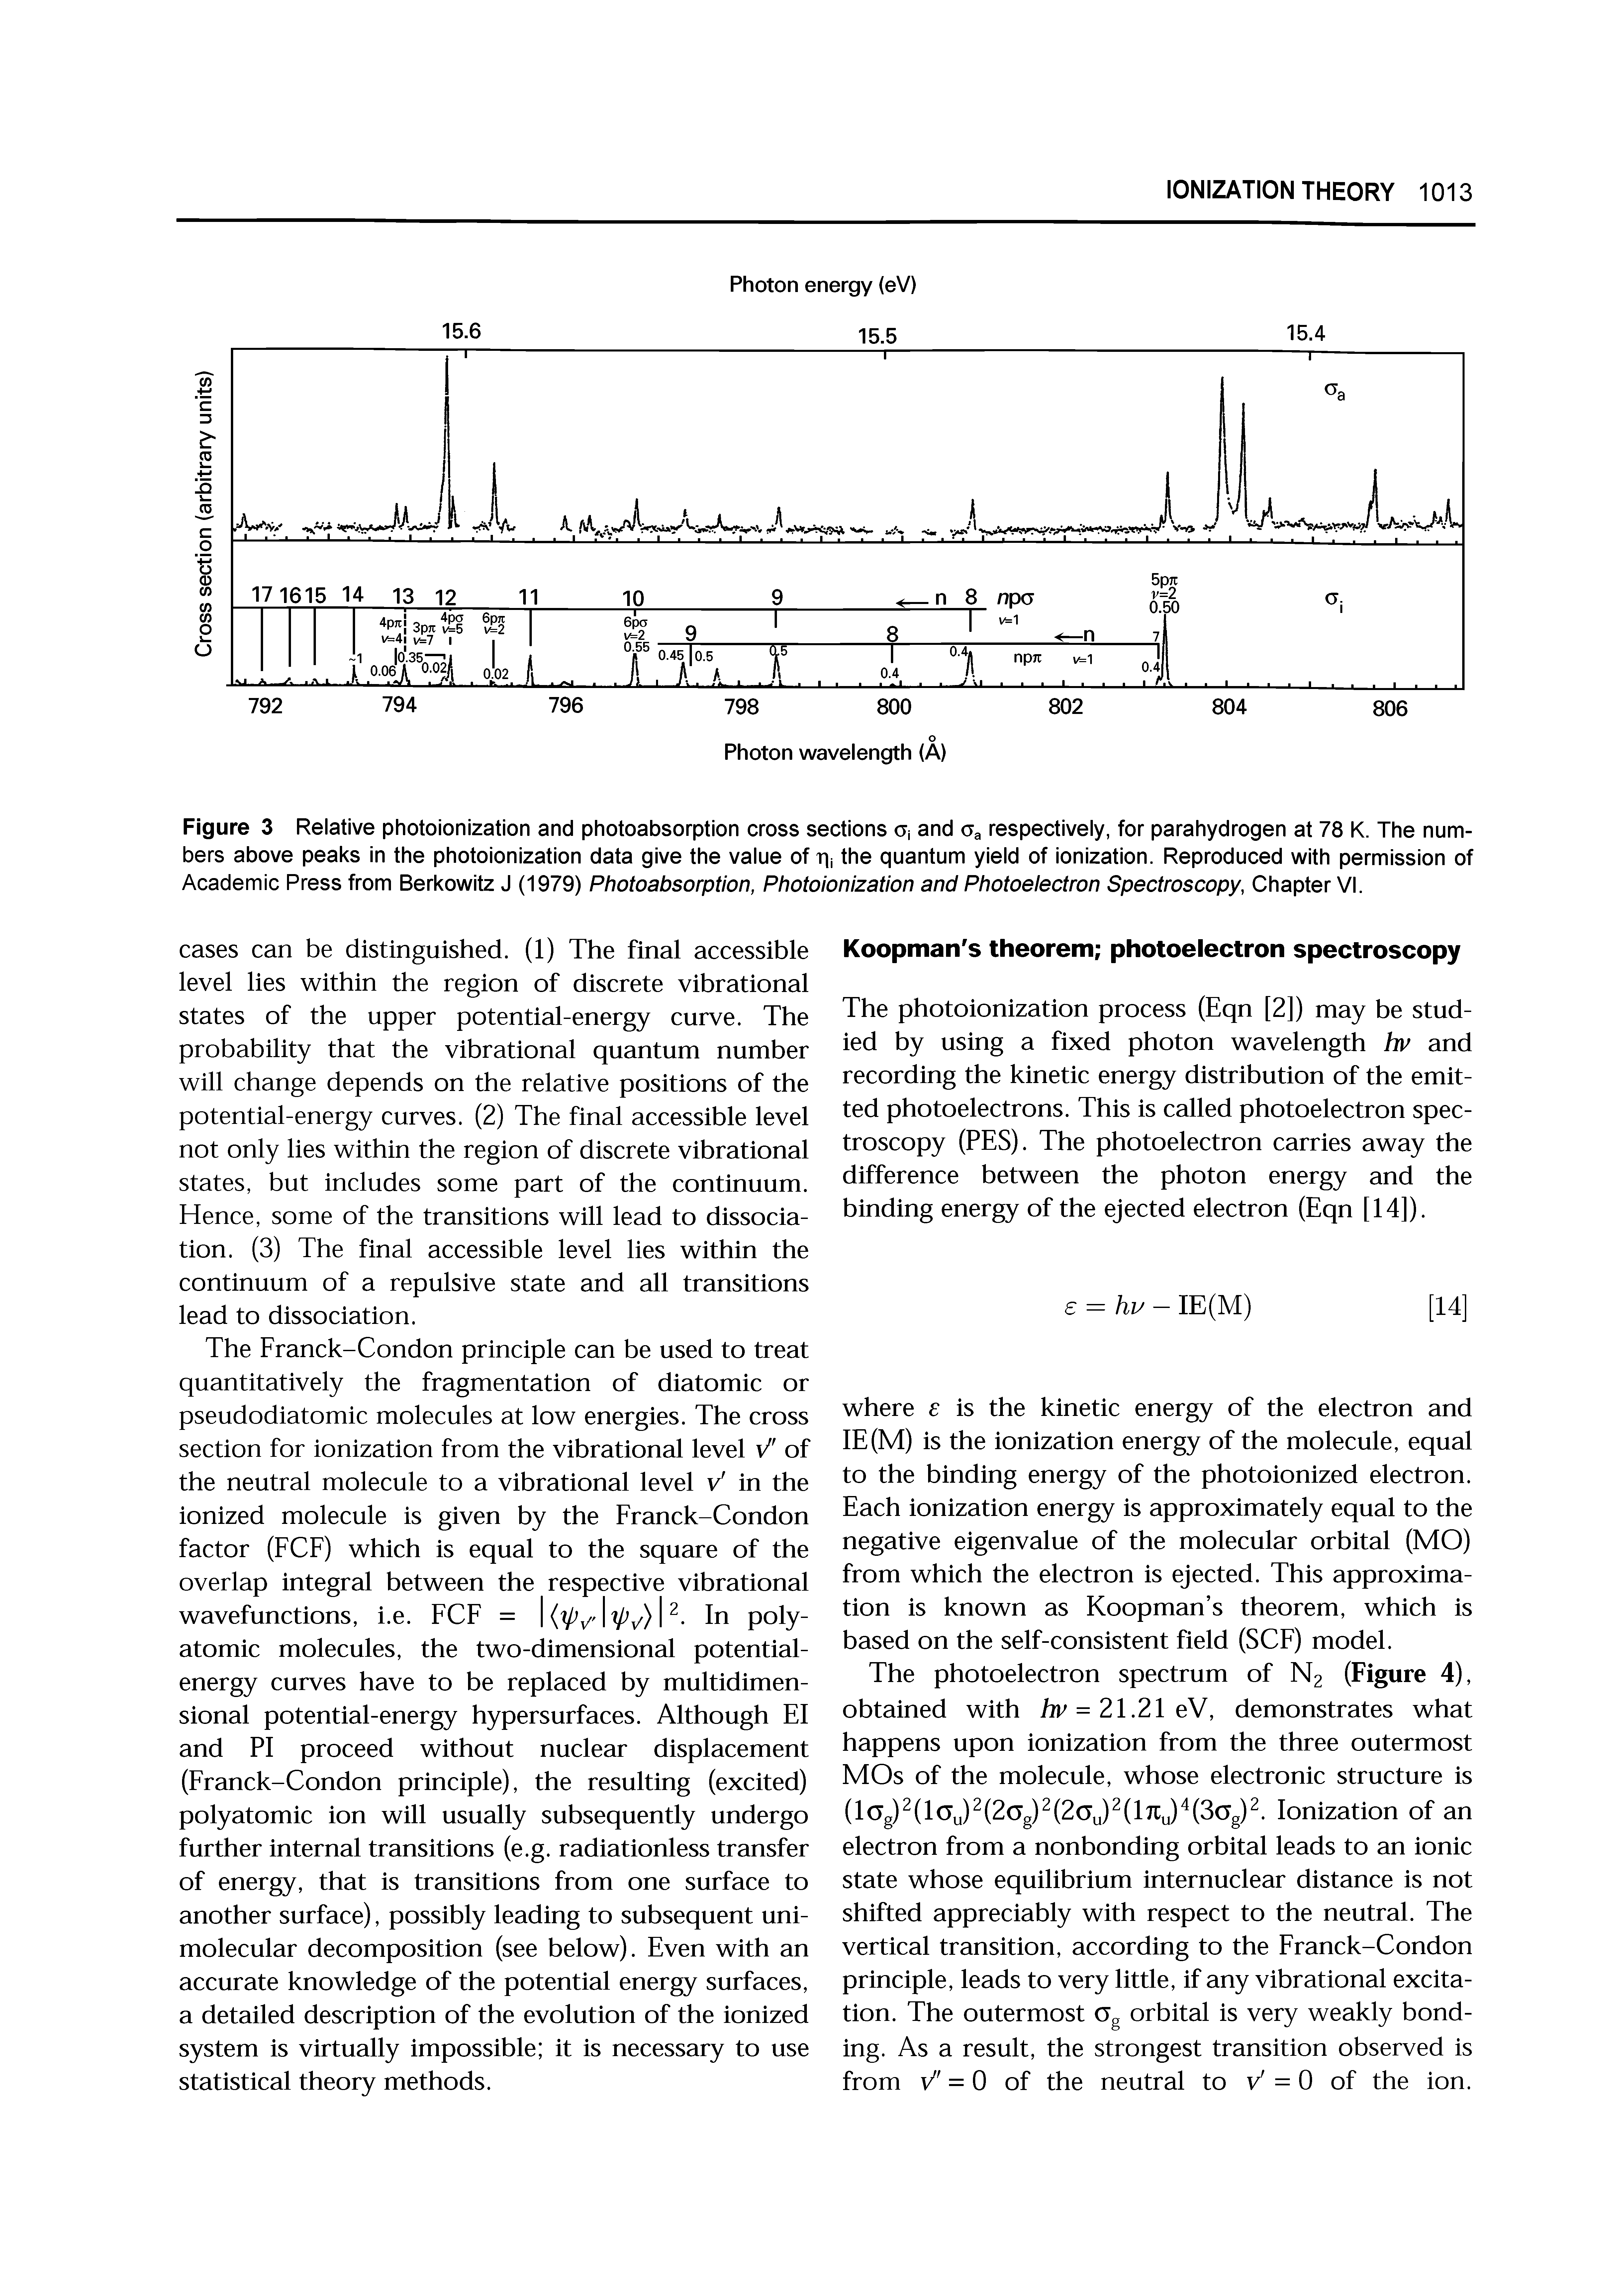 Figure 3 Relative photoionization and photoabsorption cross sections c, and Oa respectively, for parahydrogen at 78 K. The numbers above peaks in the photoionization data give the value of rij the quantum yield of ionization. Reproduced with permission of Academic Press from Berkowitz J (1979) Photoabsorption, Photoionization and Photoelectron Spectroscopy, Chapter VI.